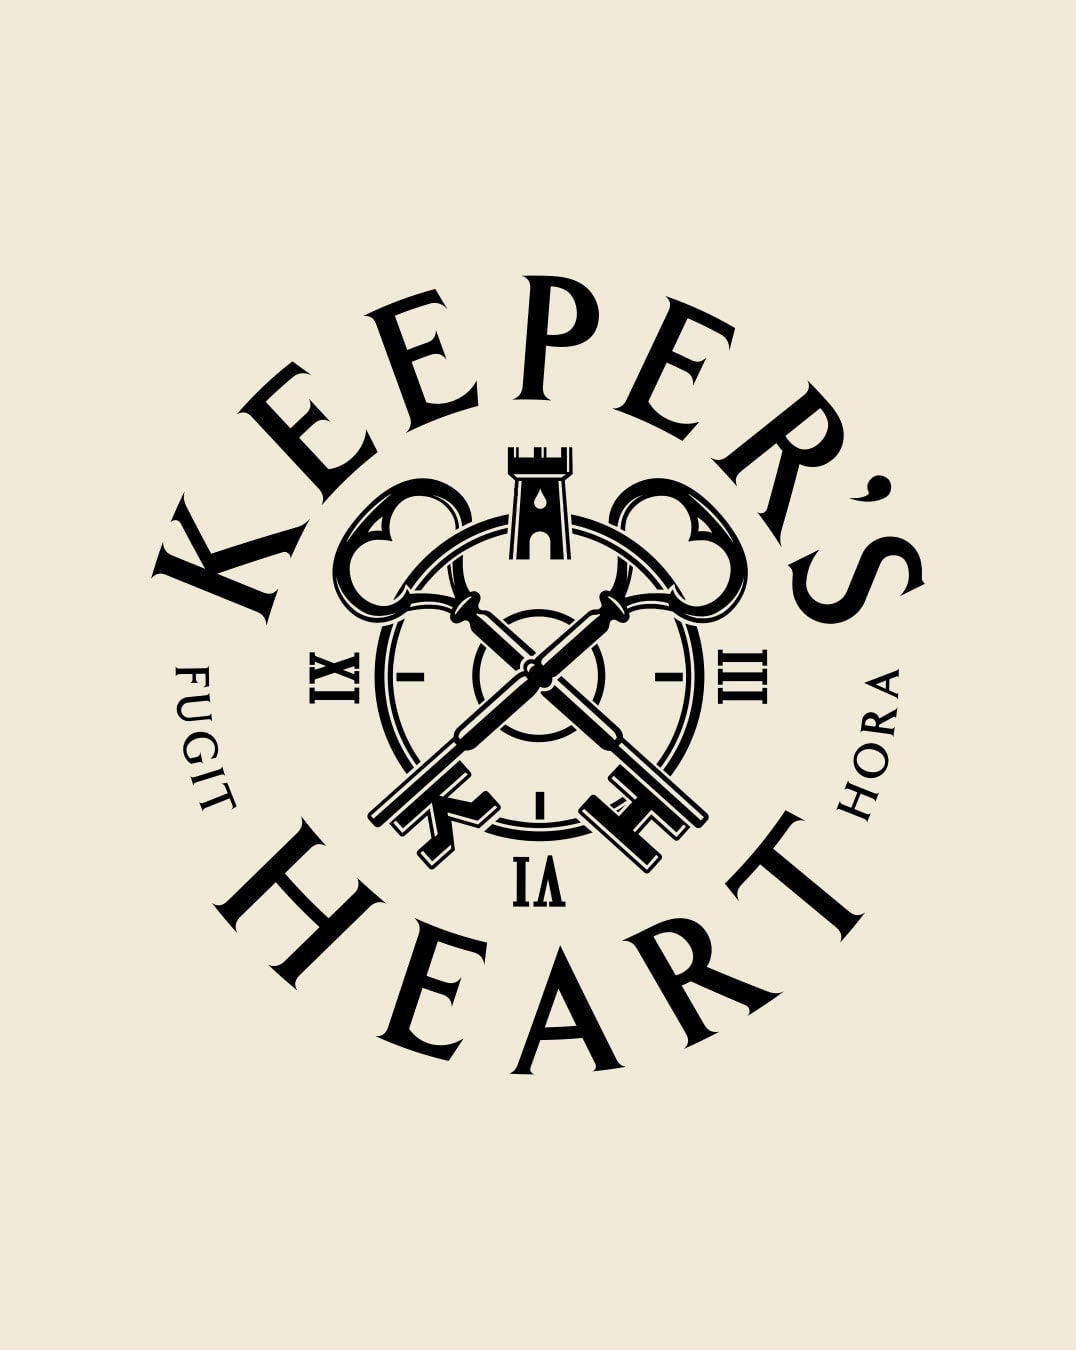 Keepers’s Heart logo one color